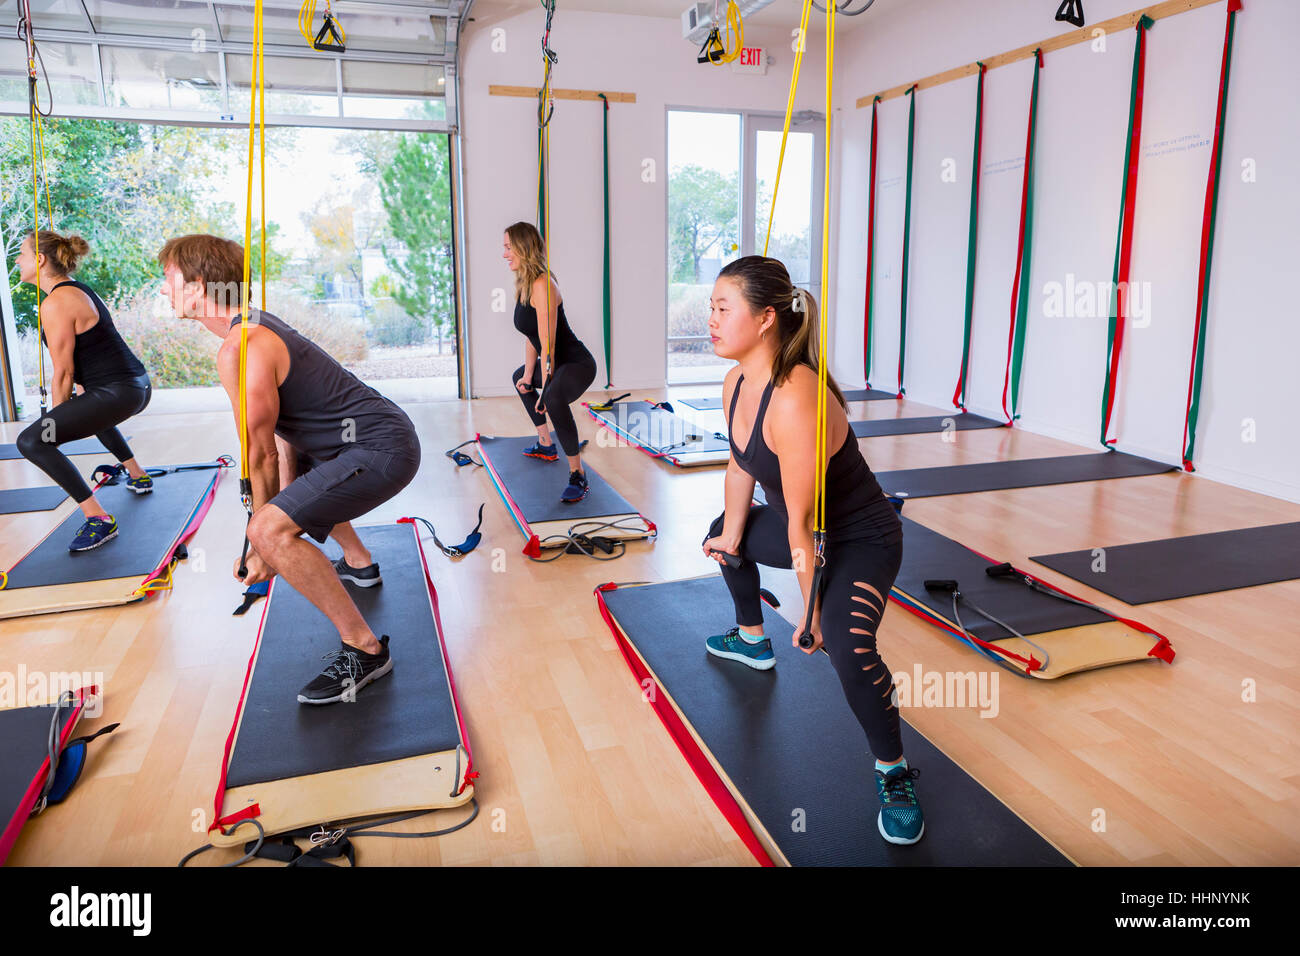 People using resistance bands in gymnasium Stock Photo